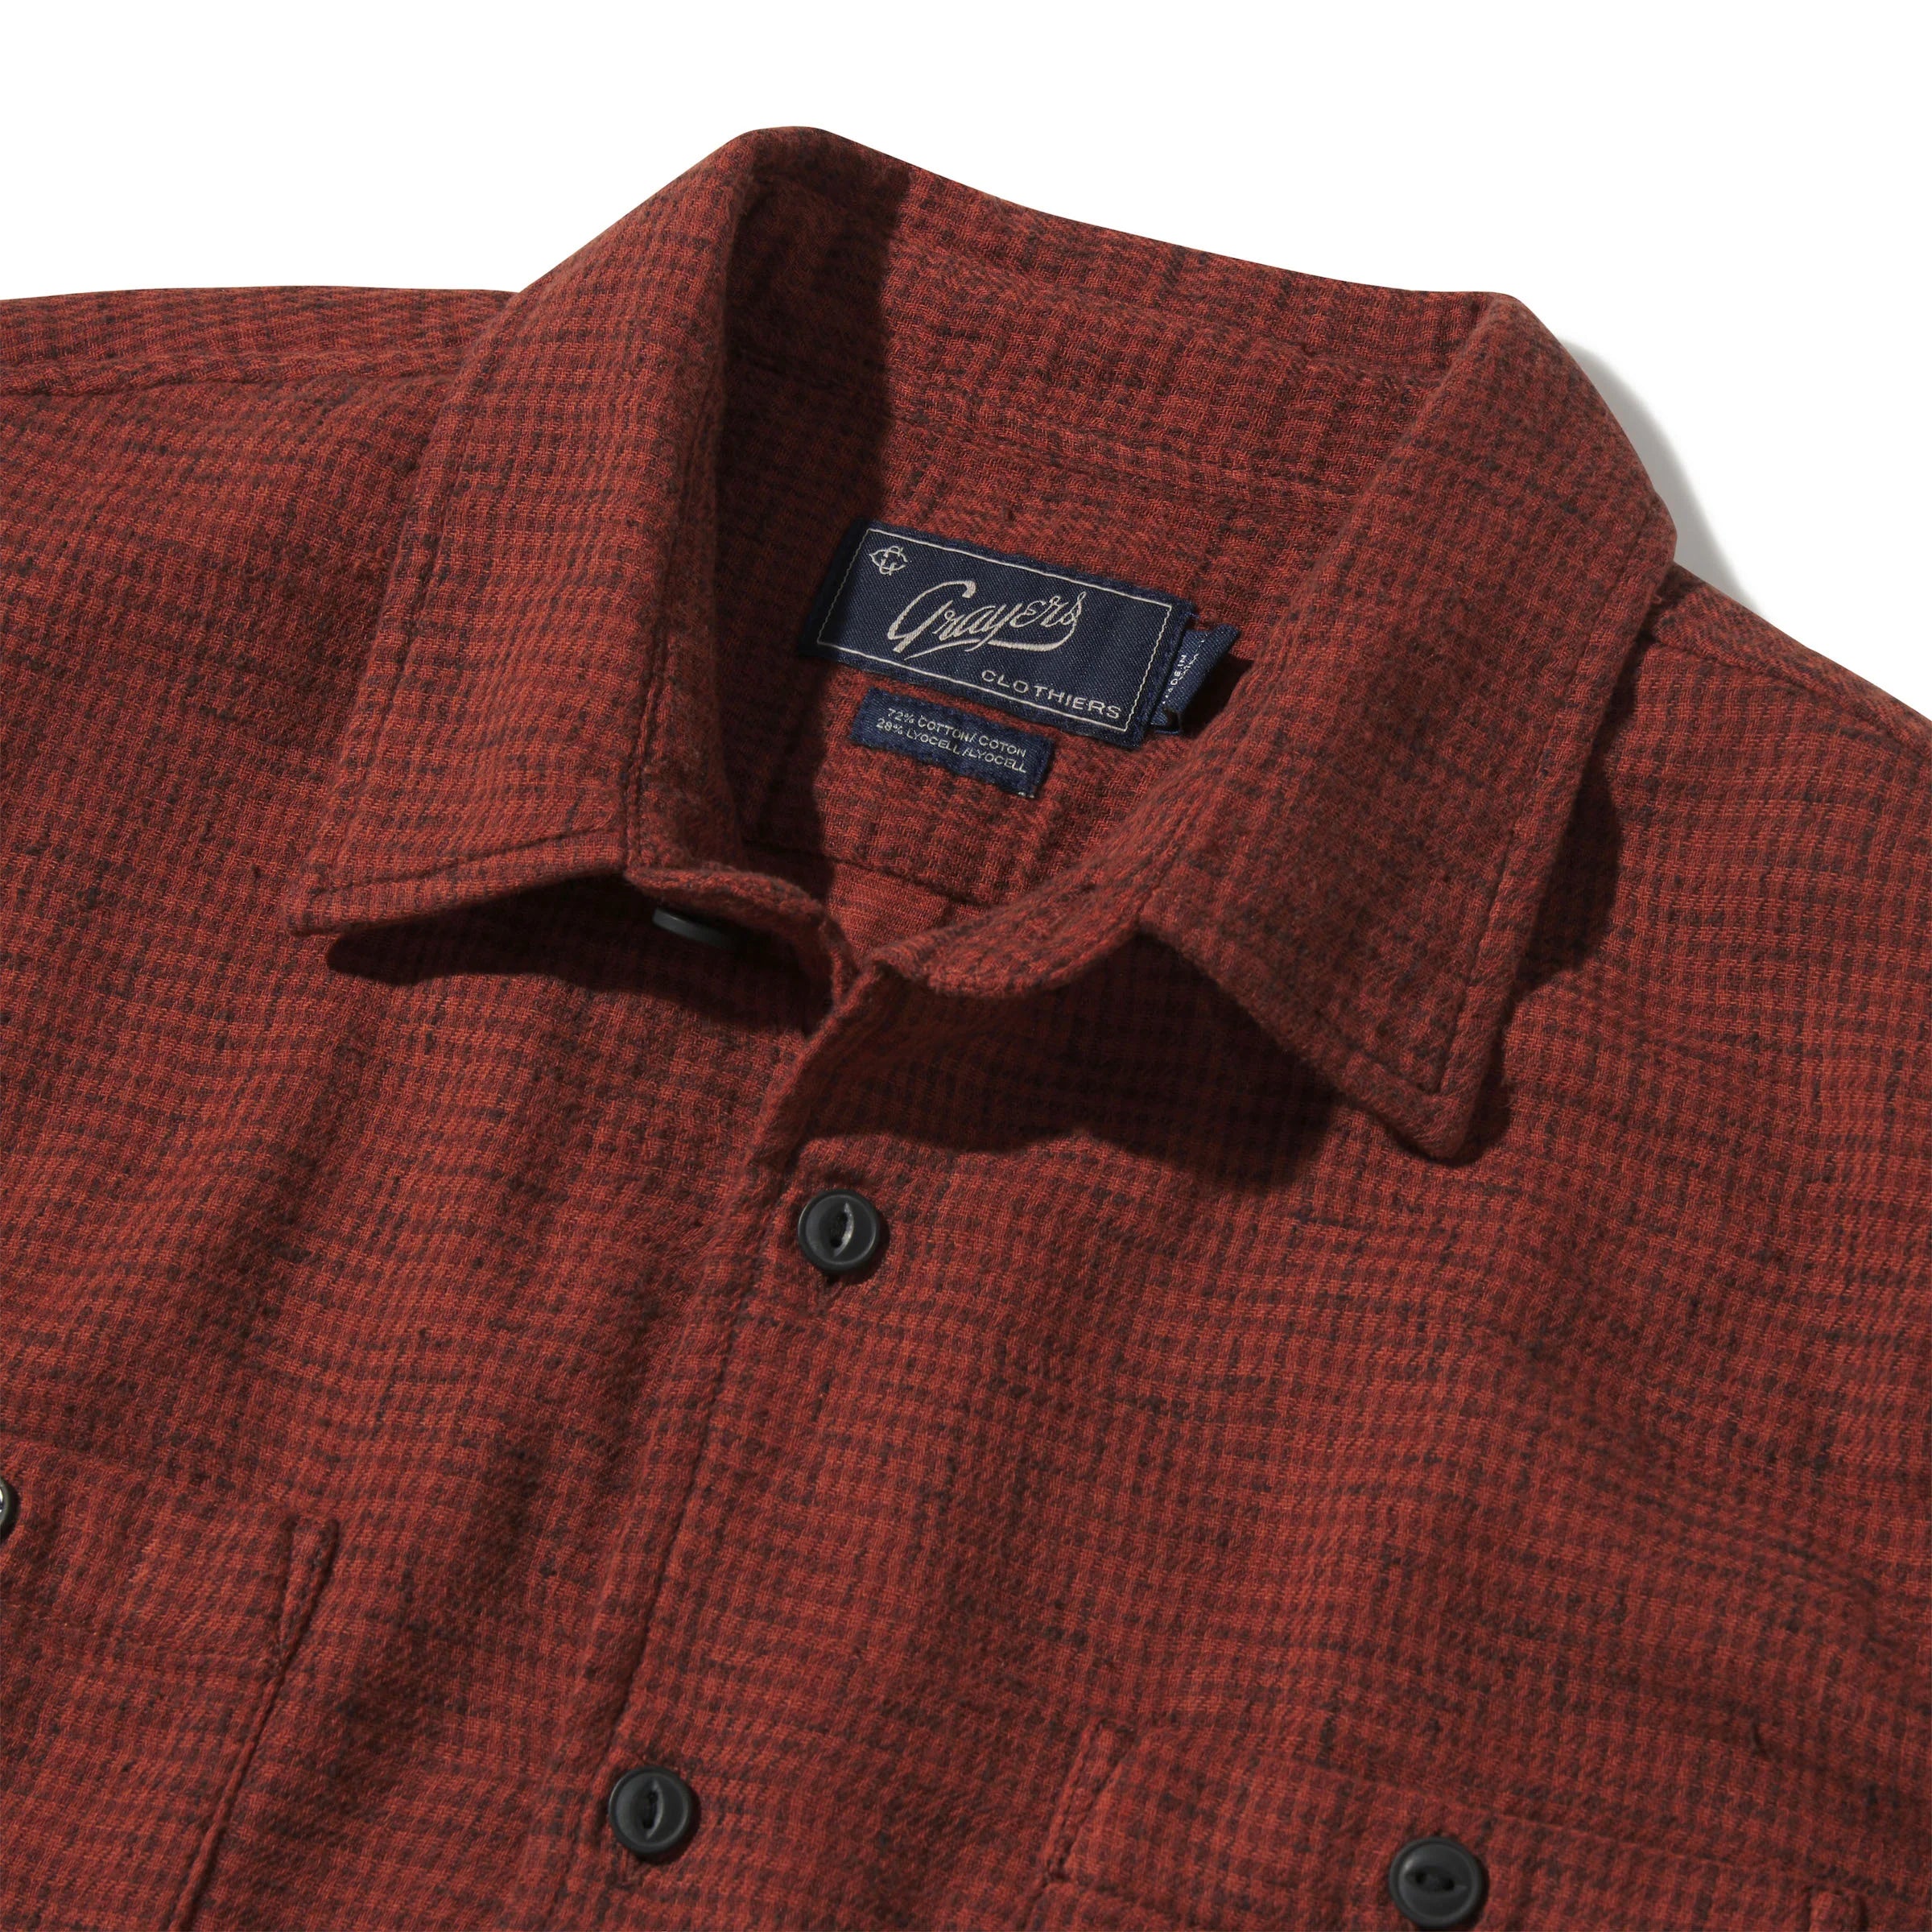 HOUNDSTOOTH DOUBLE CLOTH WORKSHIRT